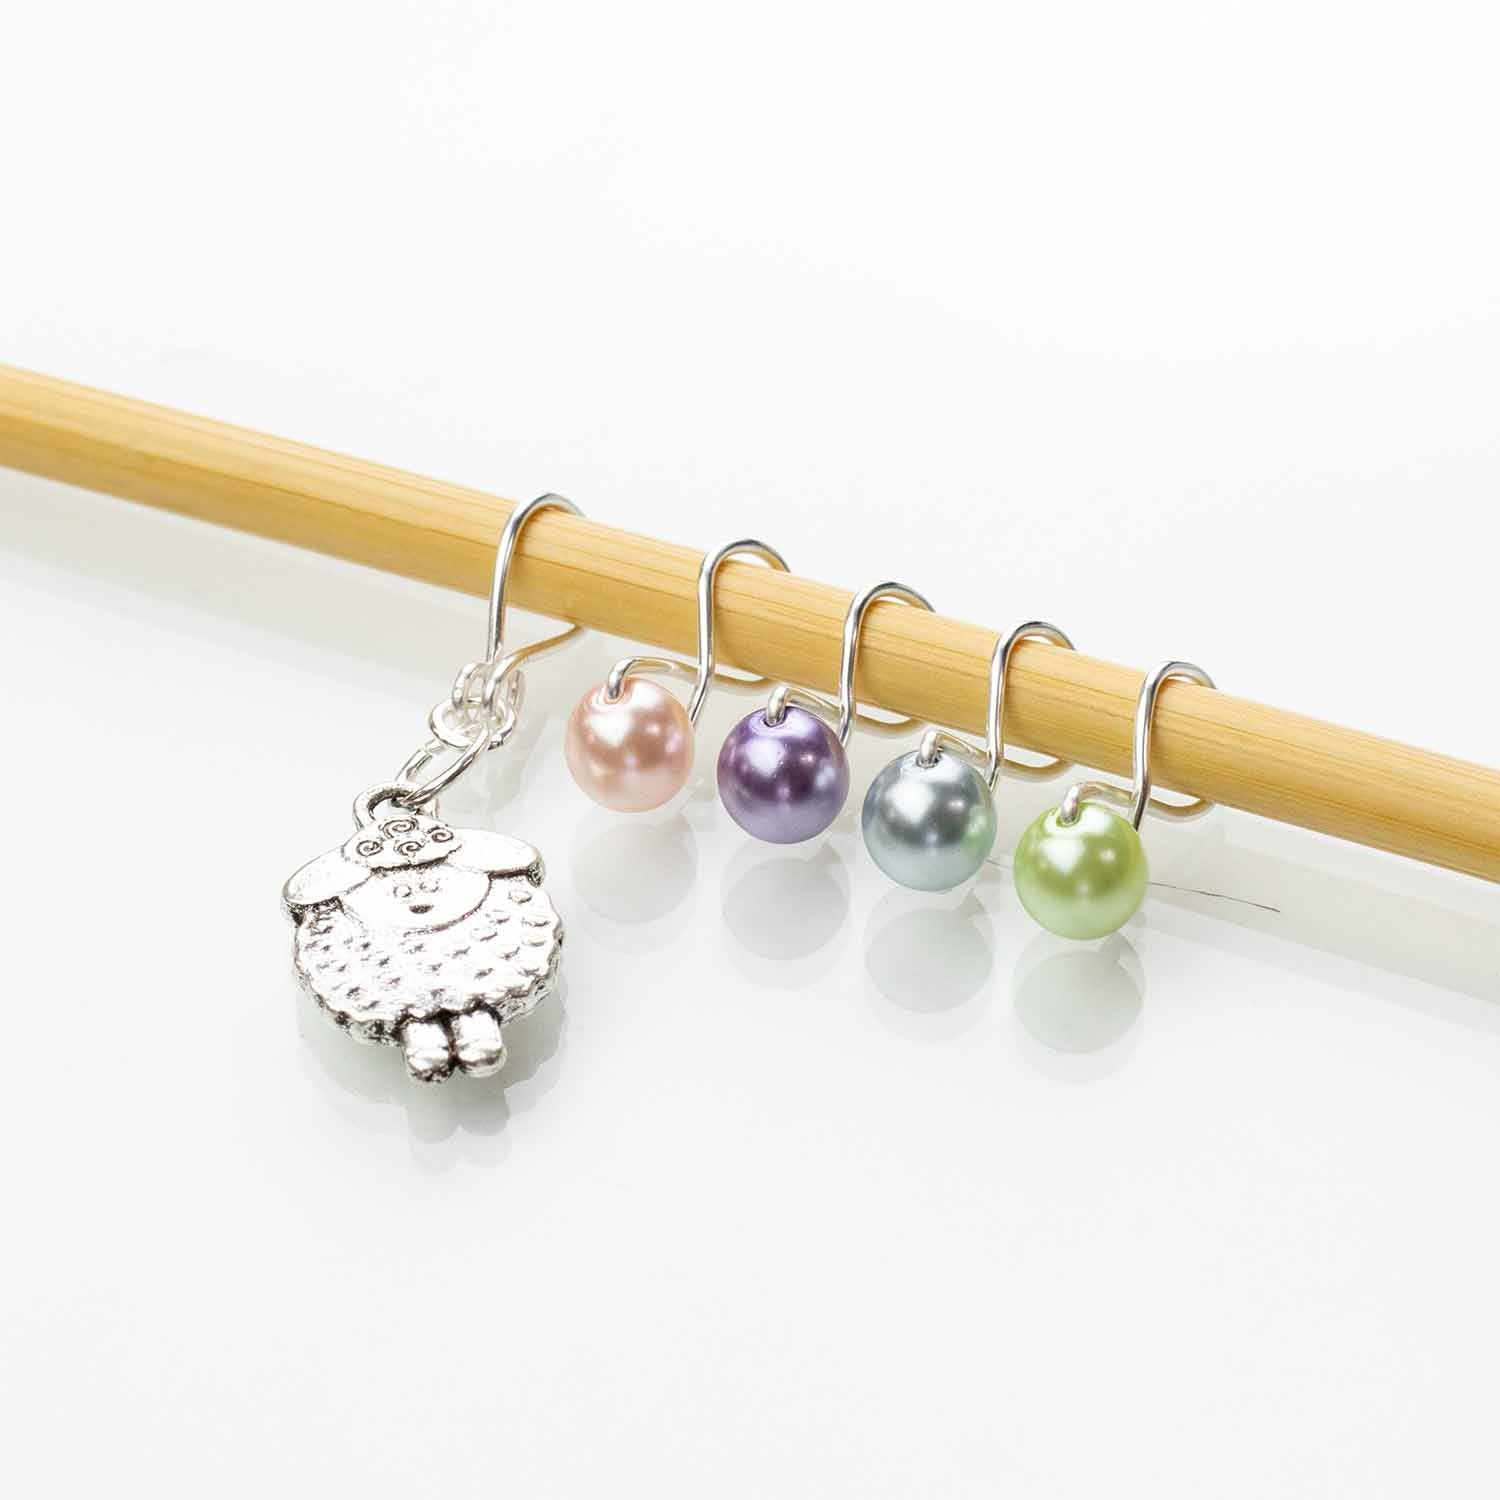 Hand made stitch markers for knitting – The Knitting Times